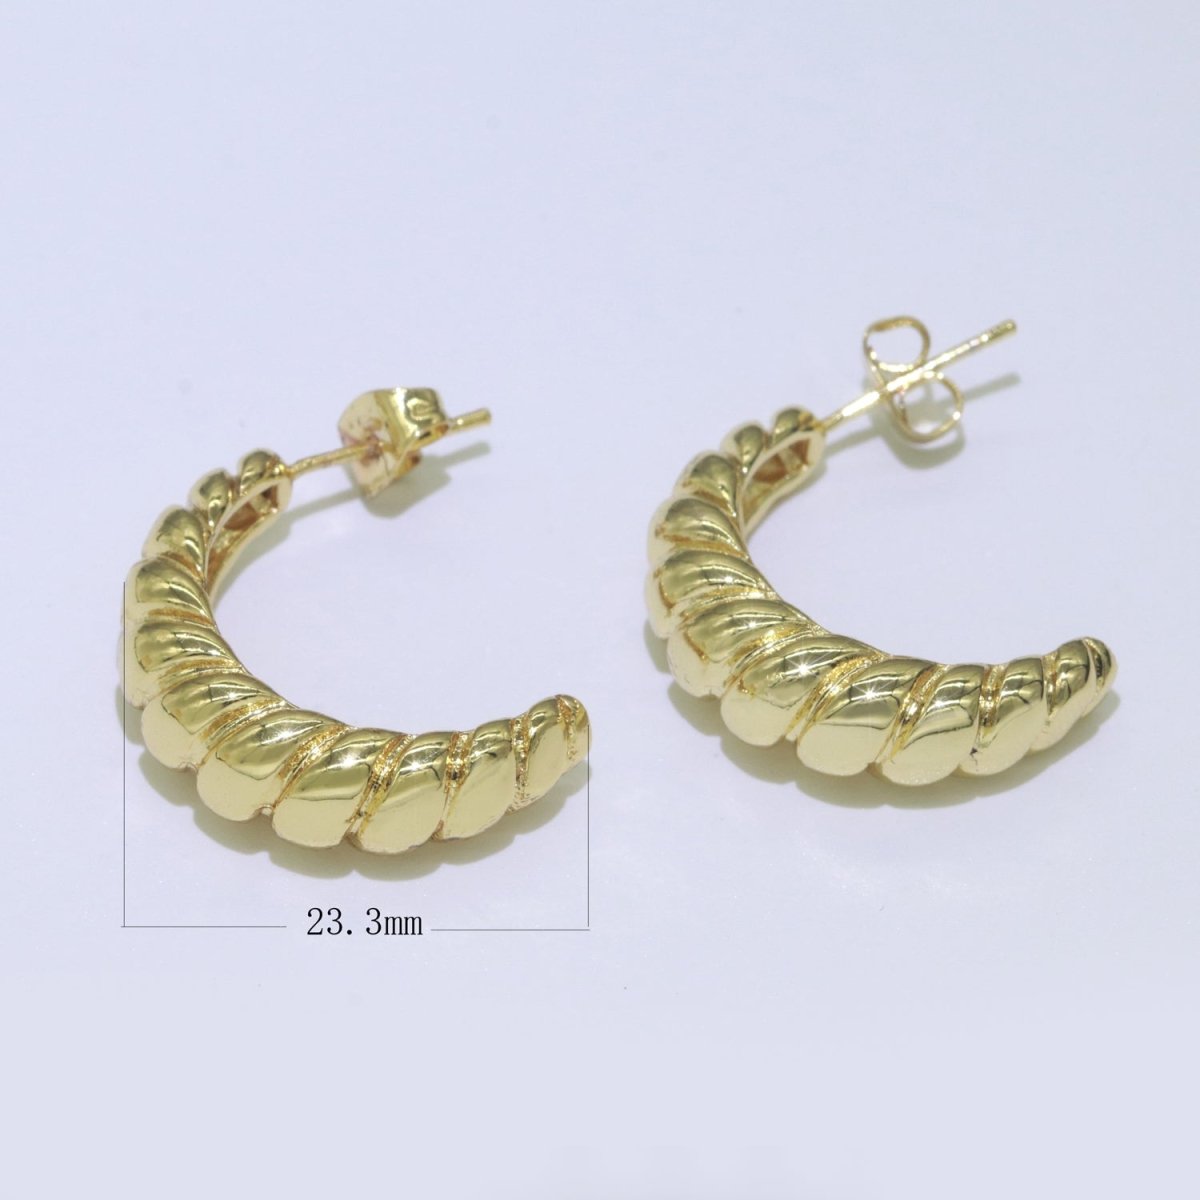 14k Gold Filled Croissant Hoop Earrings, Hypoallergenic Posts Bold Style Women Jewelry P-239 - DLUXCA